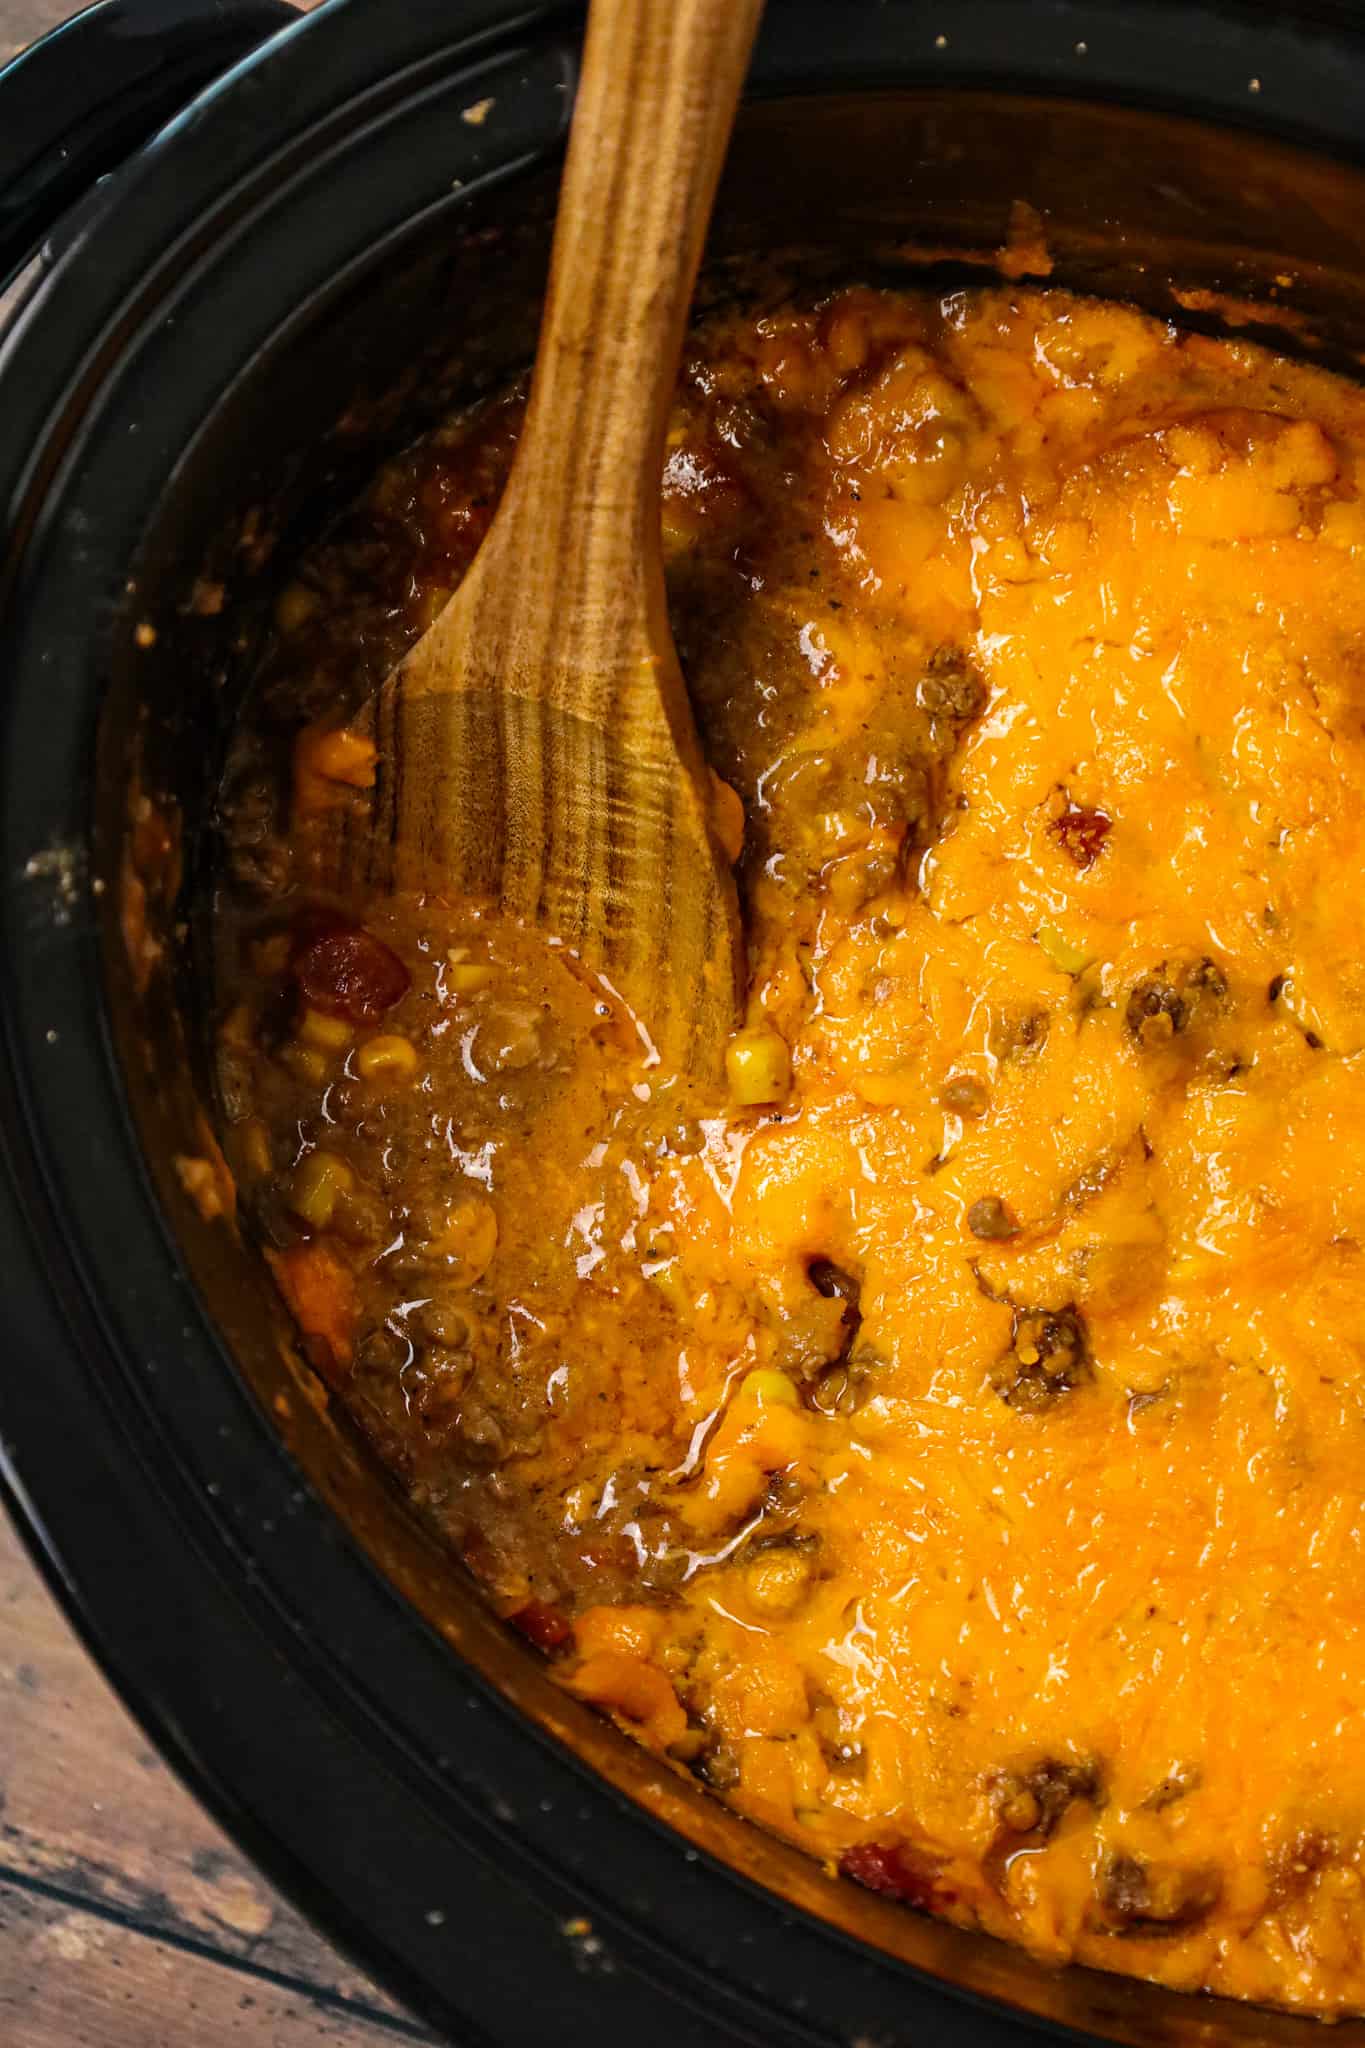 Crock Pot Cowboy Casserole is a hearty slow cooker dinner recipe loaded with ground beef, diced tomatoes, potatoes, corn and cheese.